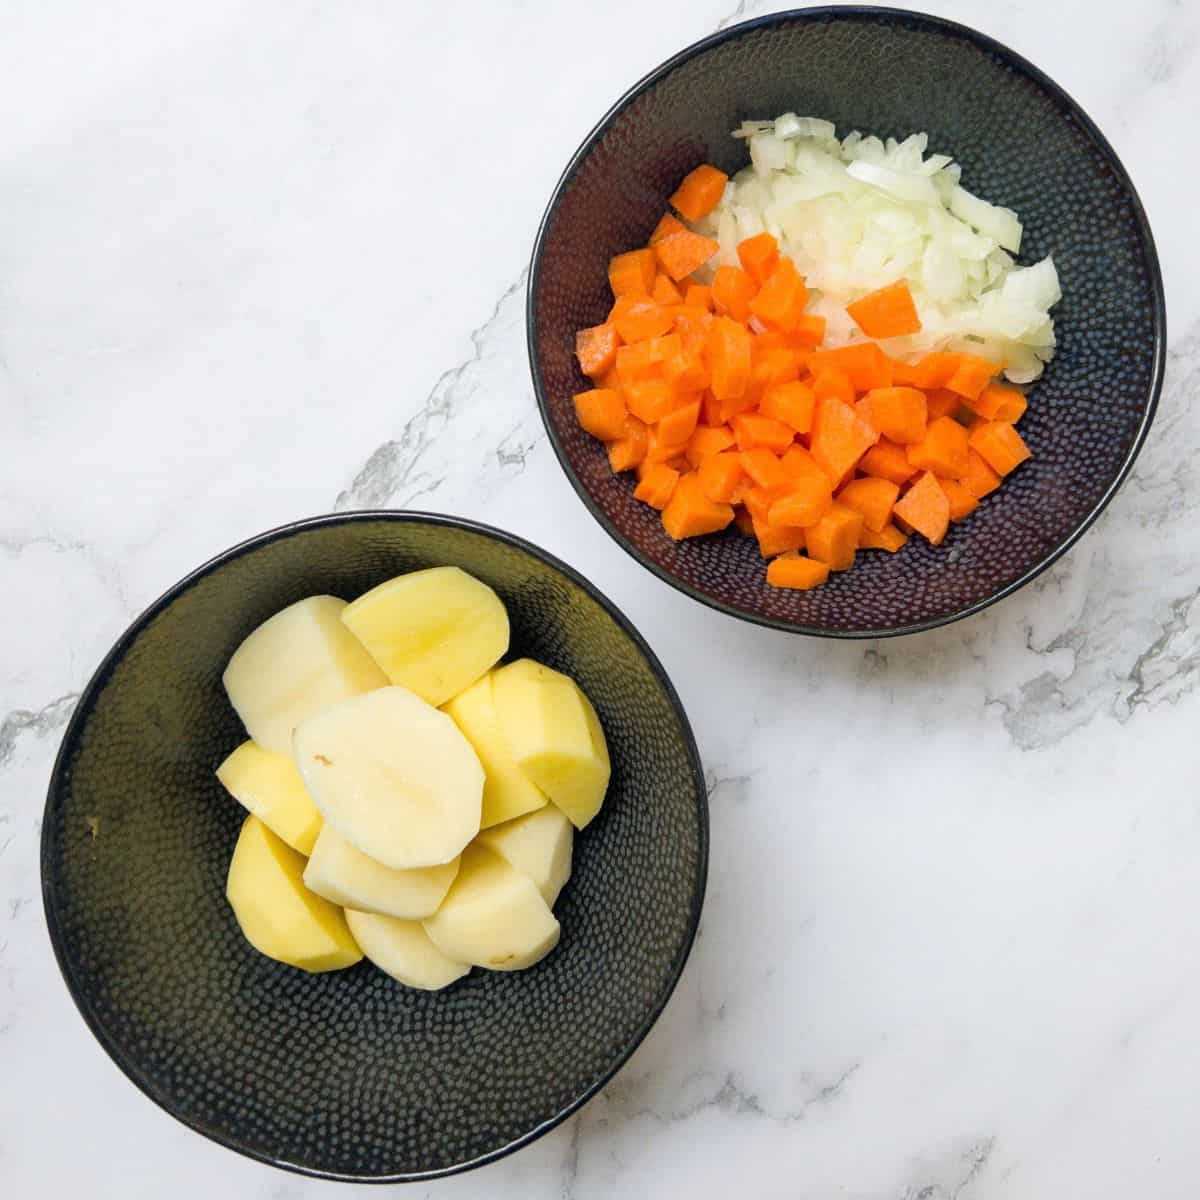 two black bowls, one containing chopped potatoes and the other chopped carrot and onion.